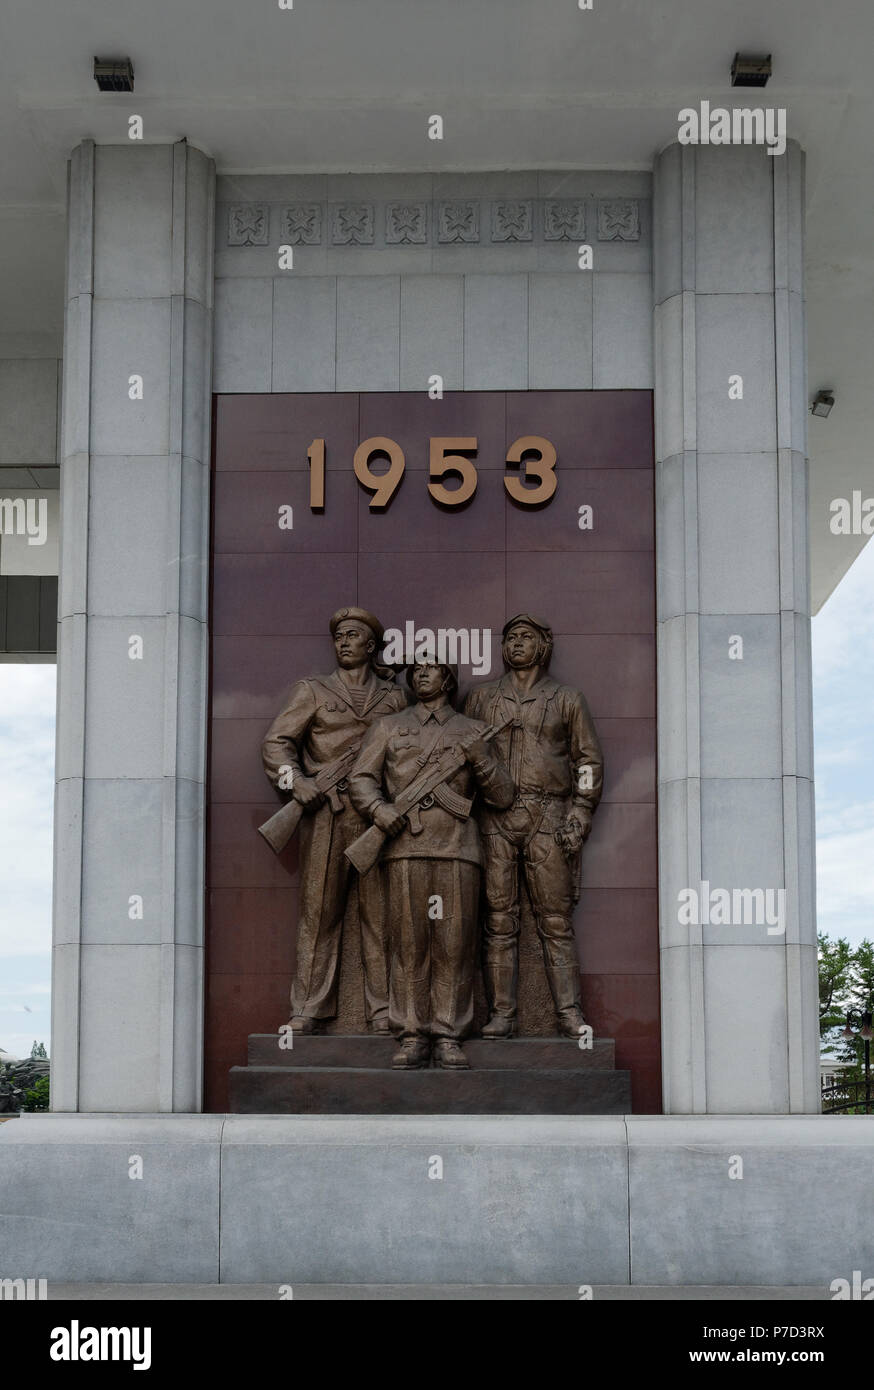 Tableau at the entry of The victorious War Museum in Pyongyang, North Korea Stock Photo